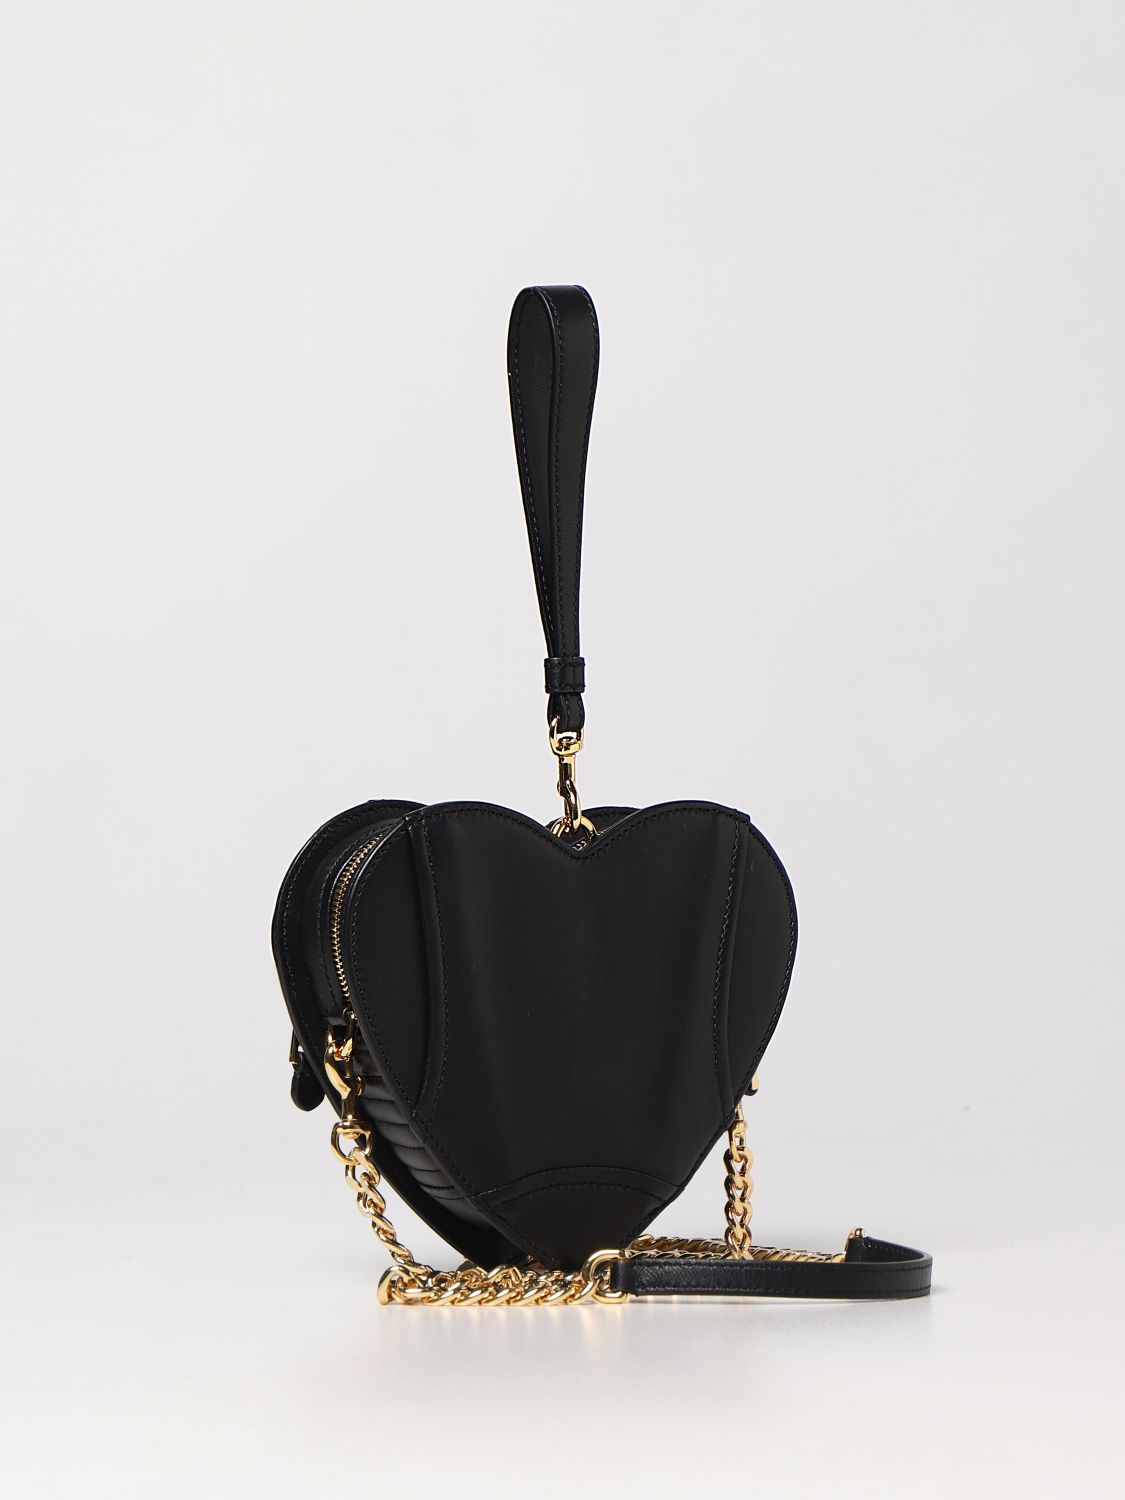 MOSCHINO COUTURE: Heart Biker leather bag - Black | Moschino Couture ...